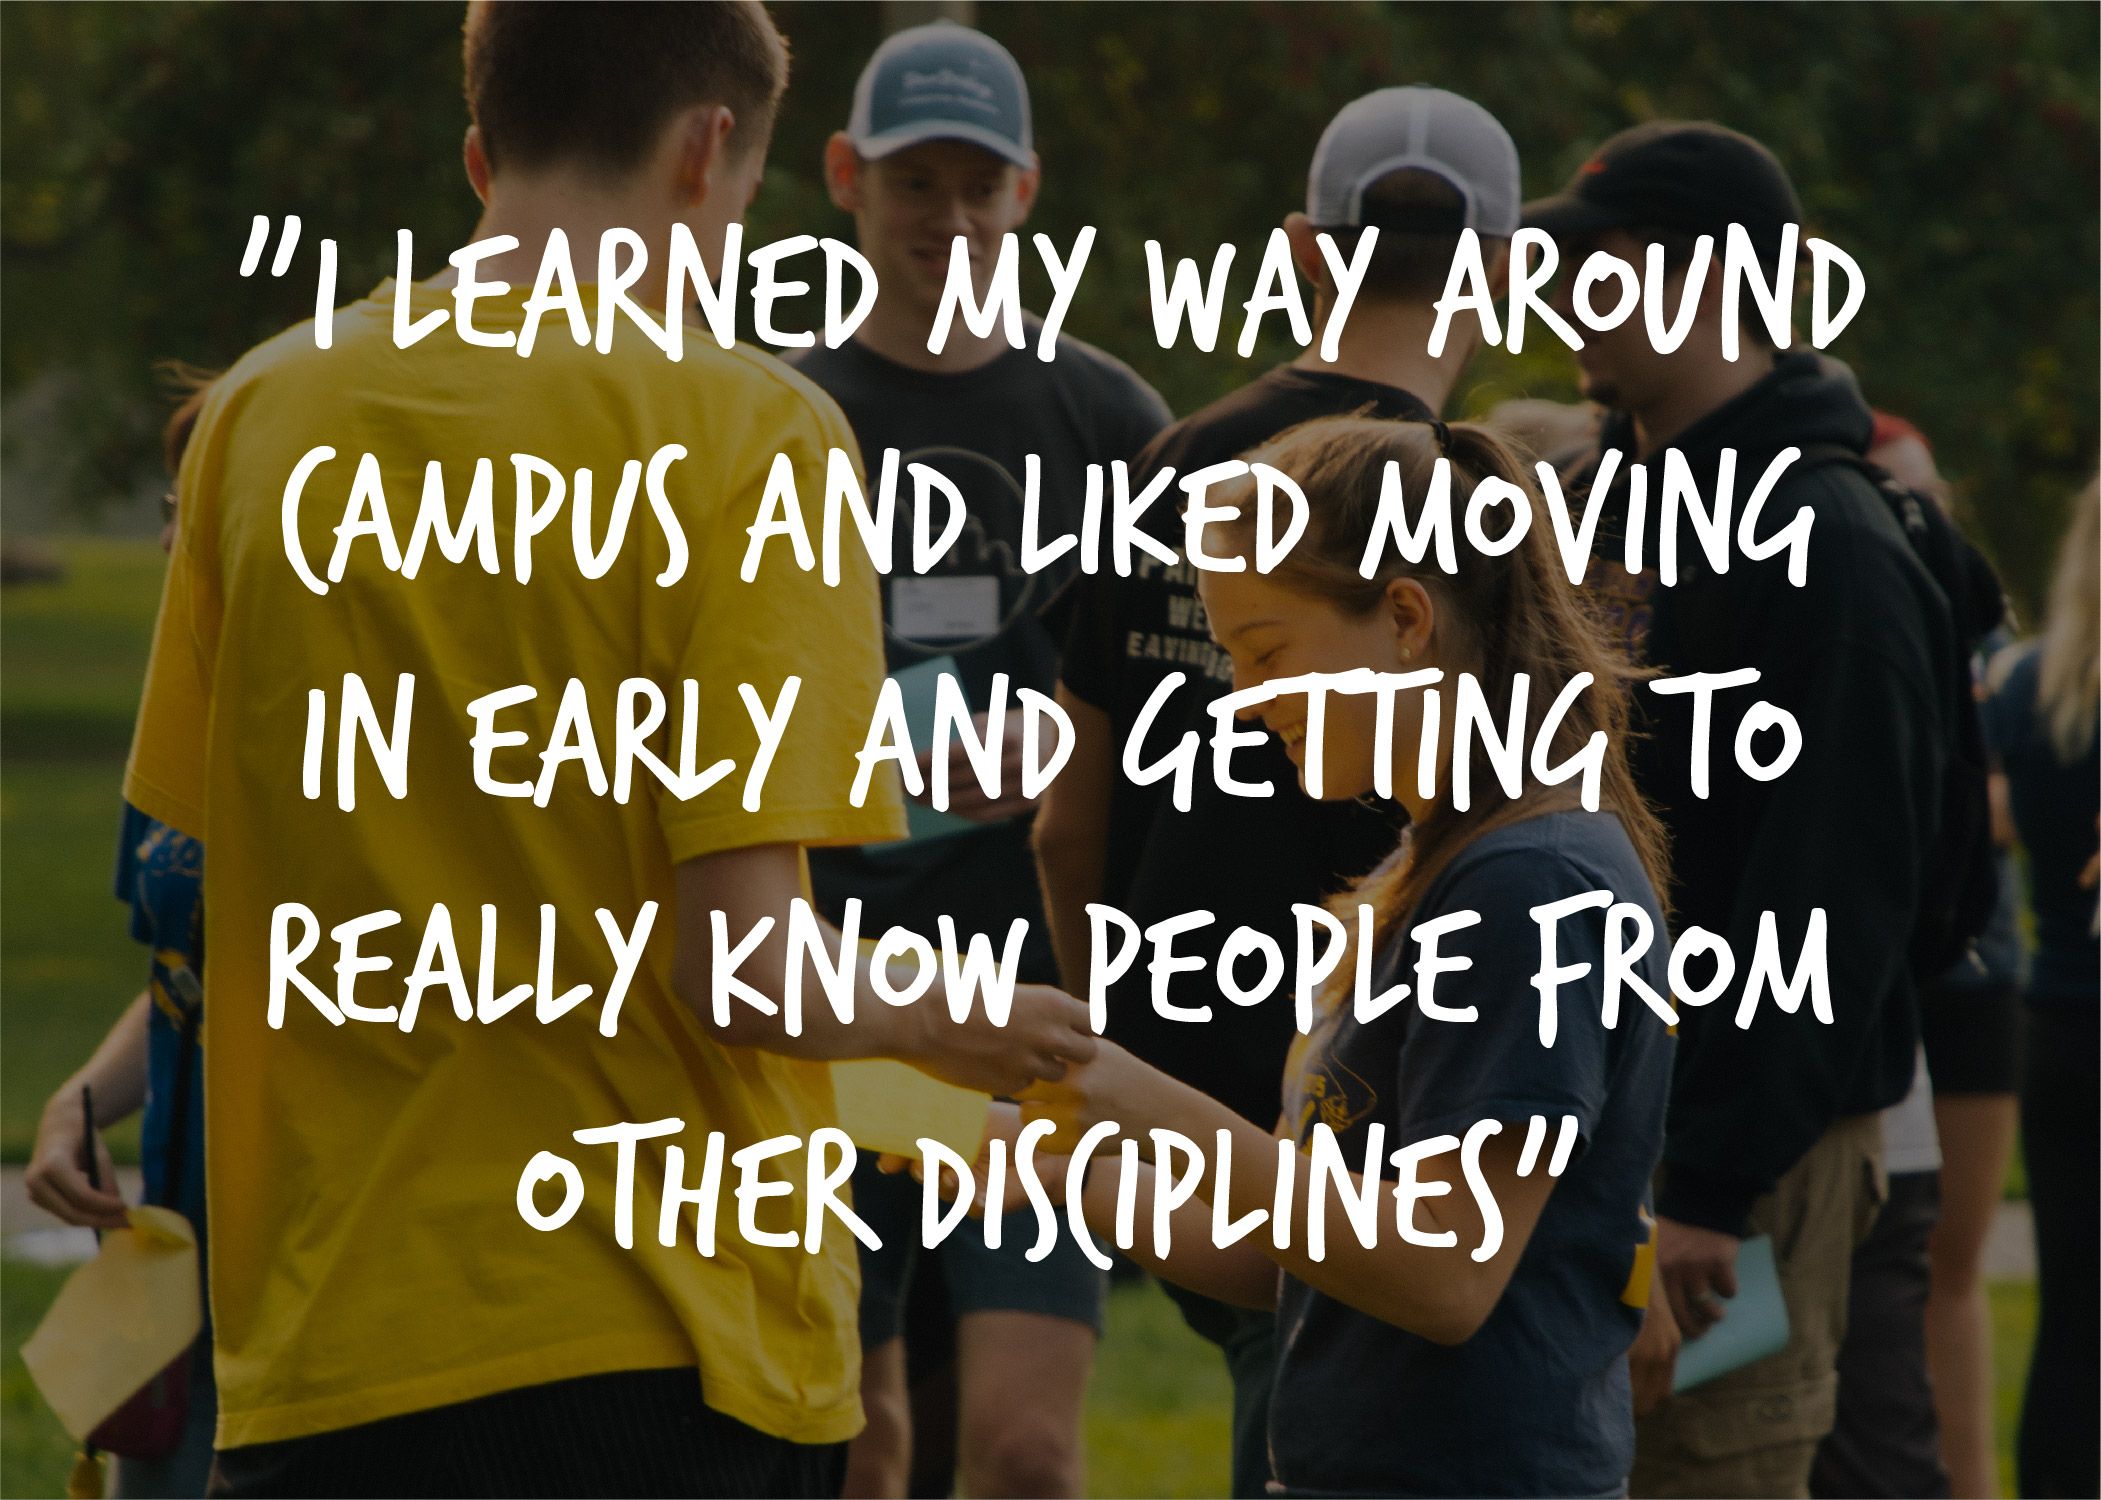 Image of students with quote that says "I learned my way around campus and liked moving in earlyand getting to really know people from other disciplines". 